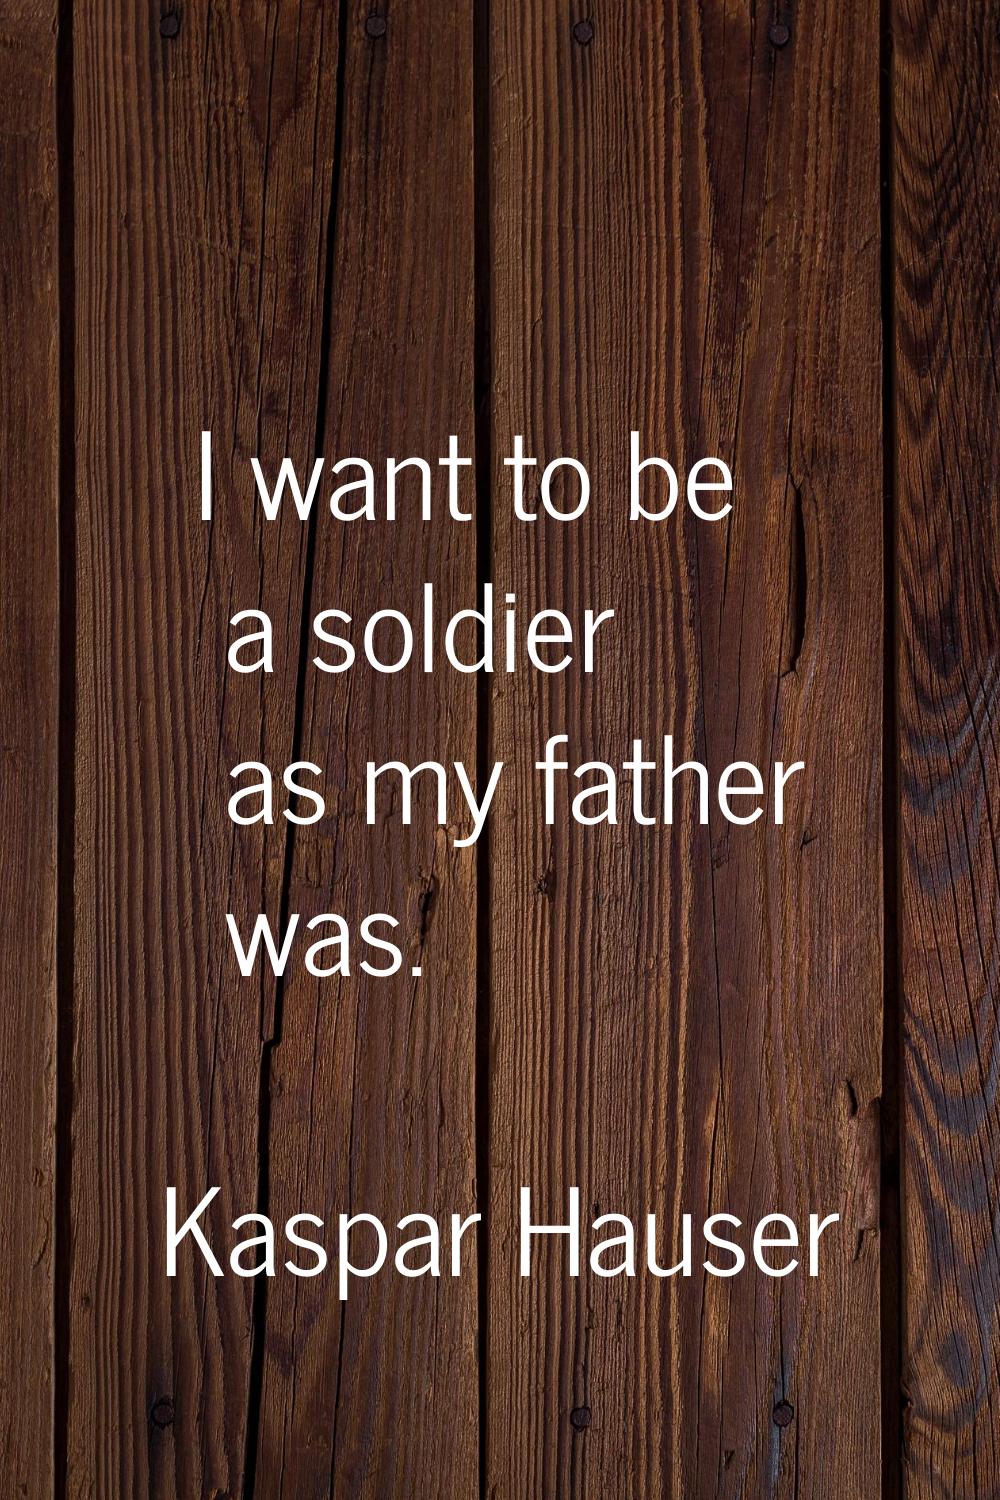 I want to be a soldier as my father was.